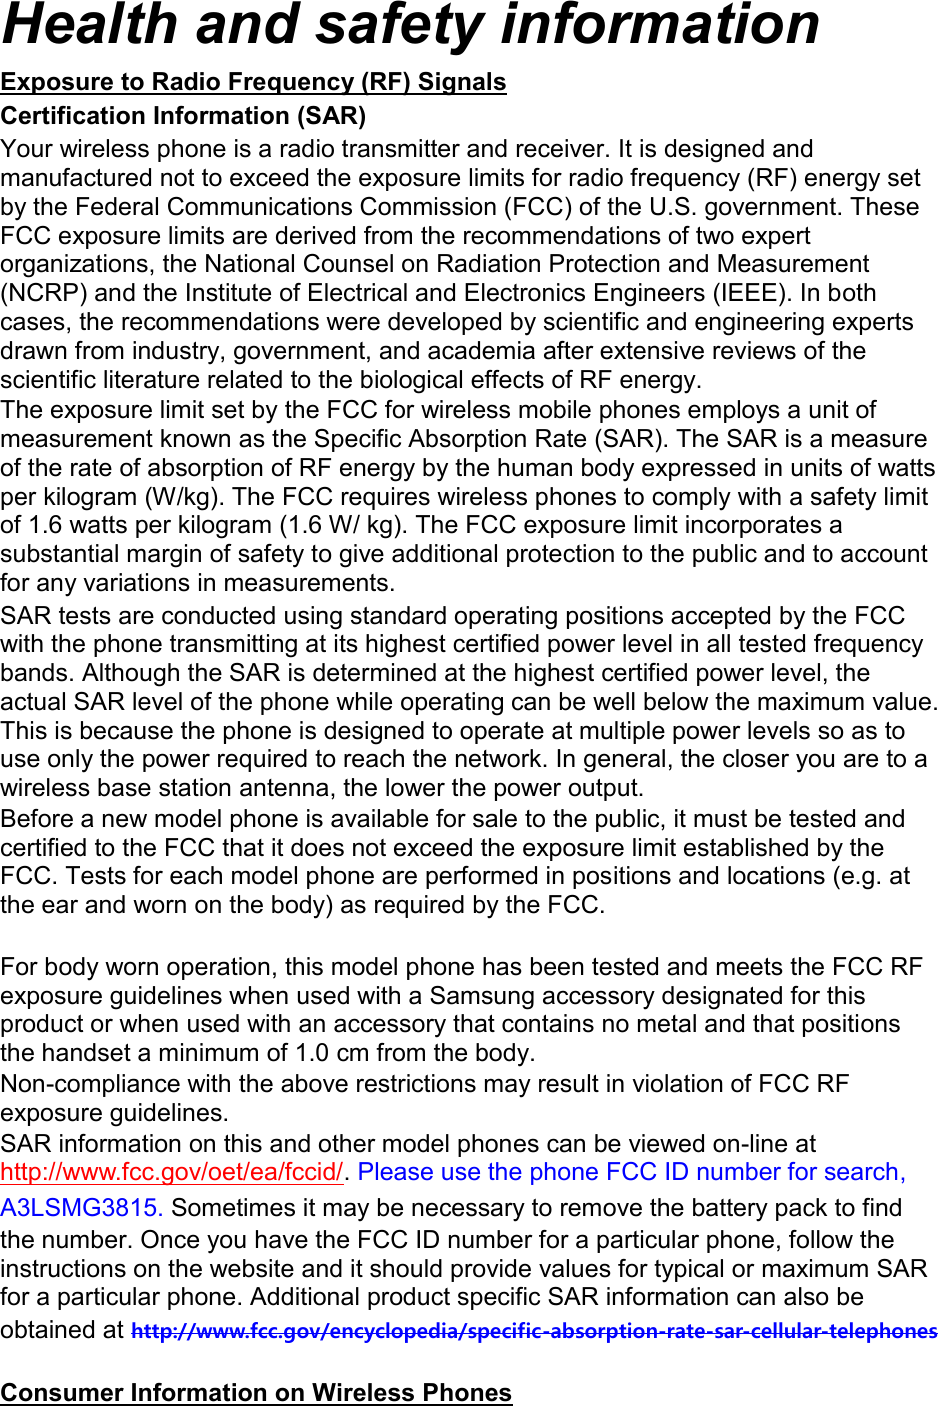 Health and safety information Exposure to Radio Frequency (RF) Signals Certification Information (SAR) Your wireless phone is a radio transmitter and receiver. It is designed and manufactured not to exceed the exposure limits for radio frequency (RF) energy set by the Federal Communications Commission (FCC) of the U.S. government. These FCC exposure limits are derived from the recommendations of two expert organizations, the National Counsel on Radiation Protection and Measurement (NCRP) and the Institute of Electrical and Electronics Engineers (IEEE). In both cases, the recommendations were developed by scientific and engineering experts drawn from industry, government, and academia after extensive reviews of the scientific literature related to the biological effects of RF energy. The exposure limit set by the FCC for wireless mobile phones employs a unit of measurement known as the Specific Absorption Rate (SAR). The SAR is a measure of the rate of absorption of RF energy by the human body expressed in units of watts per kilogram (W/kg). The FCC requires wireless phones to comply with a safety limit of 1.6 watts per kilogram (1.6 W/ kg). The FCC exposure limit incorporates a substantial margin of safety to give additional protection to the public and to account for any variations in measurements. SAR tests are conducted using standard operating positions accepted by the FCC with the phone transmitting at its highest certified power level in all tested frequency bands. Although the SAR is determined at the highest certified power level, the actual SAR level of the phone while operating can be well below the maximum value. This is because the phone is designed to operate at multiple power levels so as to use only the power required to reach the network. In general, the closer you are to a wireless base station antenna, the lower the power output. Before a new model phone is available for sale to the public, it must be tested and certified to the FCC that it does not exceed the exposure limit established by the FCC. Tests for each model phone are performed in positions and locations (e.g. at the ear and worn on the body) as required by the FCC.      For body worn operation, this model phone has been tested and meets the FCC RF exposure guidelines when used with a Samsung accessory designated for this product or when used with an accessory that contains no metal and that positions the handset a minimum of 1.0 cm from the body.   Non-compliance with the above restrictions may result in violation of FCC RF exposure guidelines. SAR information on this and other model phones can be viewed on-line at http://www.fcc.gov/oet/ea/fccid/. Please use the phone FCC ID number for search, A3LSMG3815. Sometimes it may be necessary to remove the battery pack to find the number. Once you have the FCC ID number for a particular phone, follow the instructions on the website and it should provide values for typical or maximum SAR for a particular phone. Additional product specific SAR information can also be obtained at http://www.fcc.gov/encyclopedia/specific-absorption-rate-sar-cellular-telephones  Consumer Information on Wireless Phones 